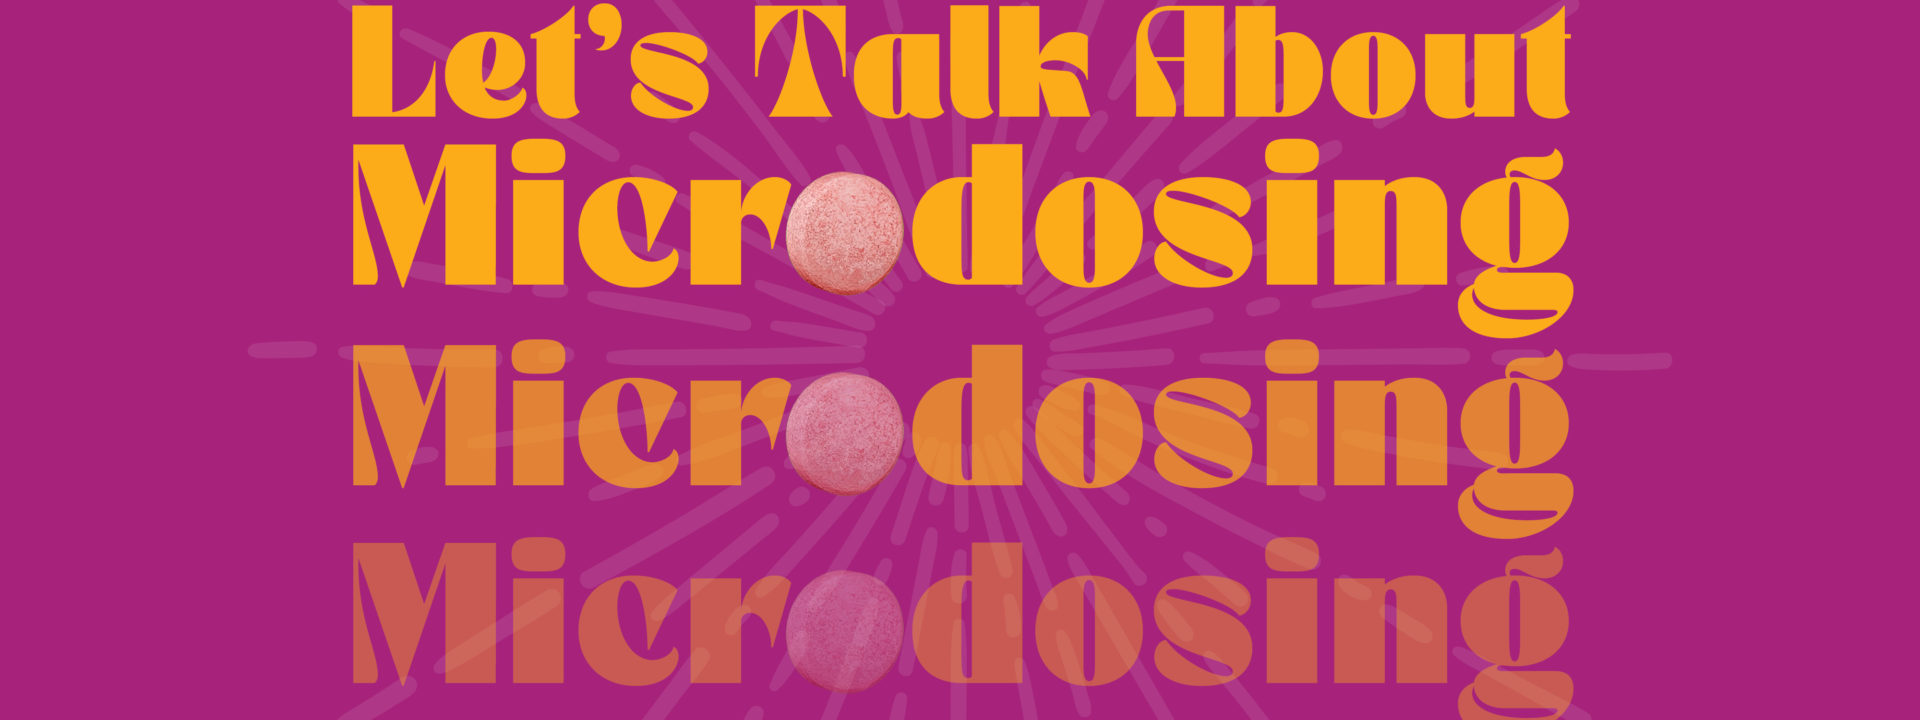 Magenta background with orange text Let’s Talk About Microdosing. Microdosing is repeated on 3 lines below, and the O is a Jewels cannabis tart.